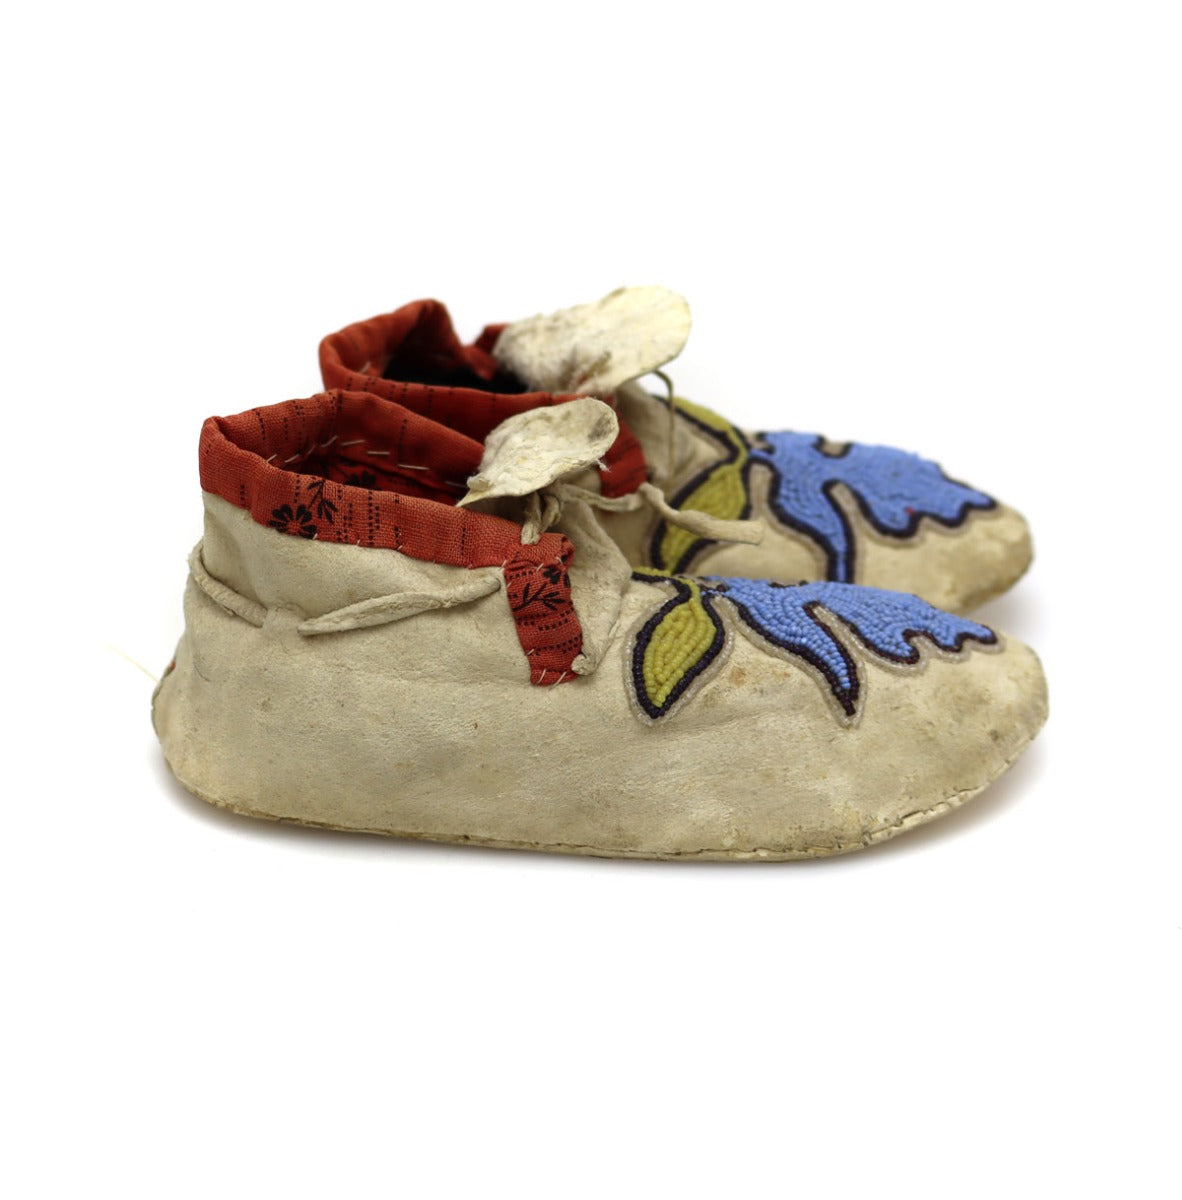 Woodlands (Sac and Fox) Leather Beaded Moccasins with Floral Design c. 1900s, 2" x 5.25" x 2.25" (DW92323A-0421-015) 4
